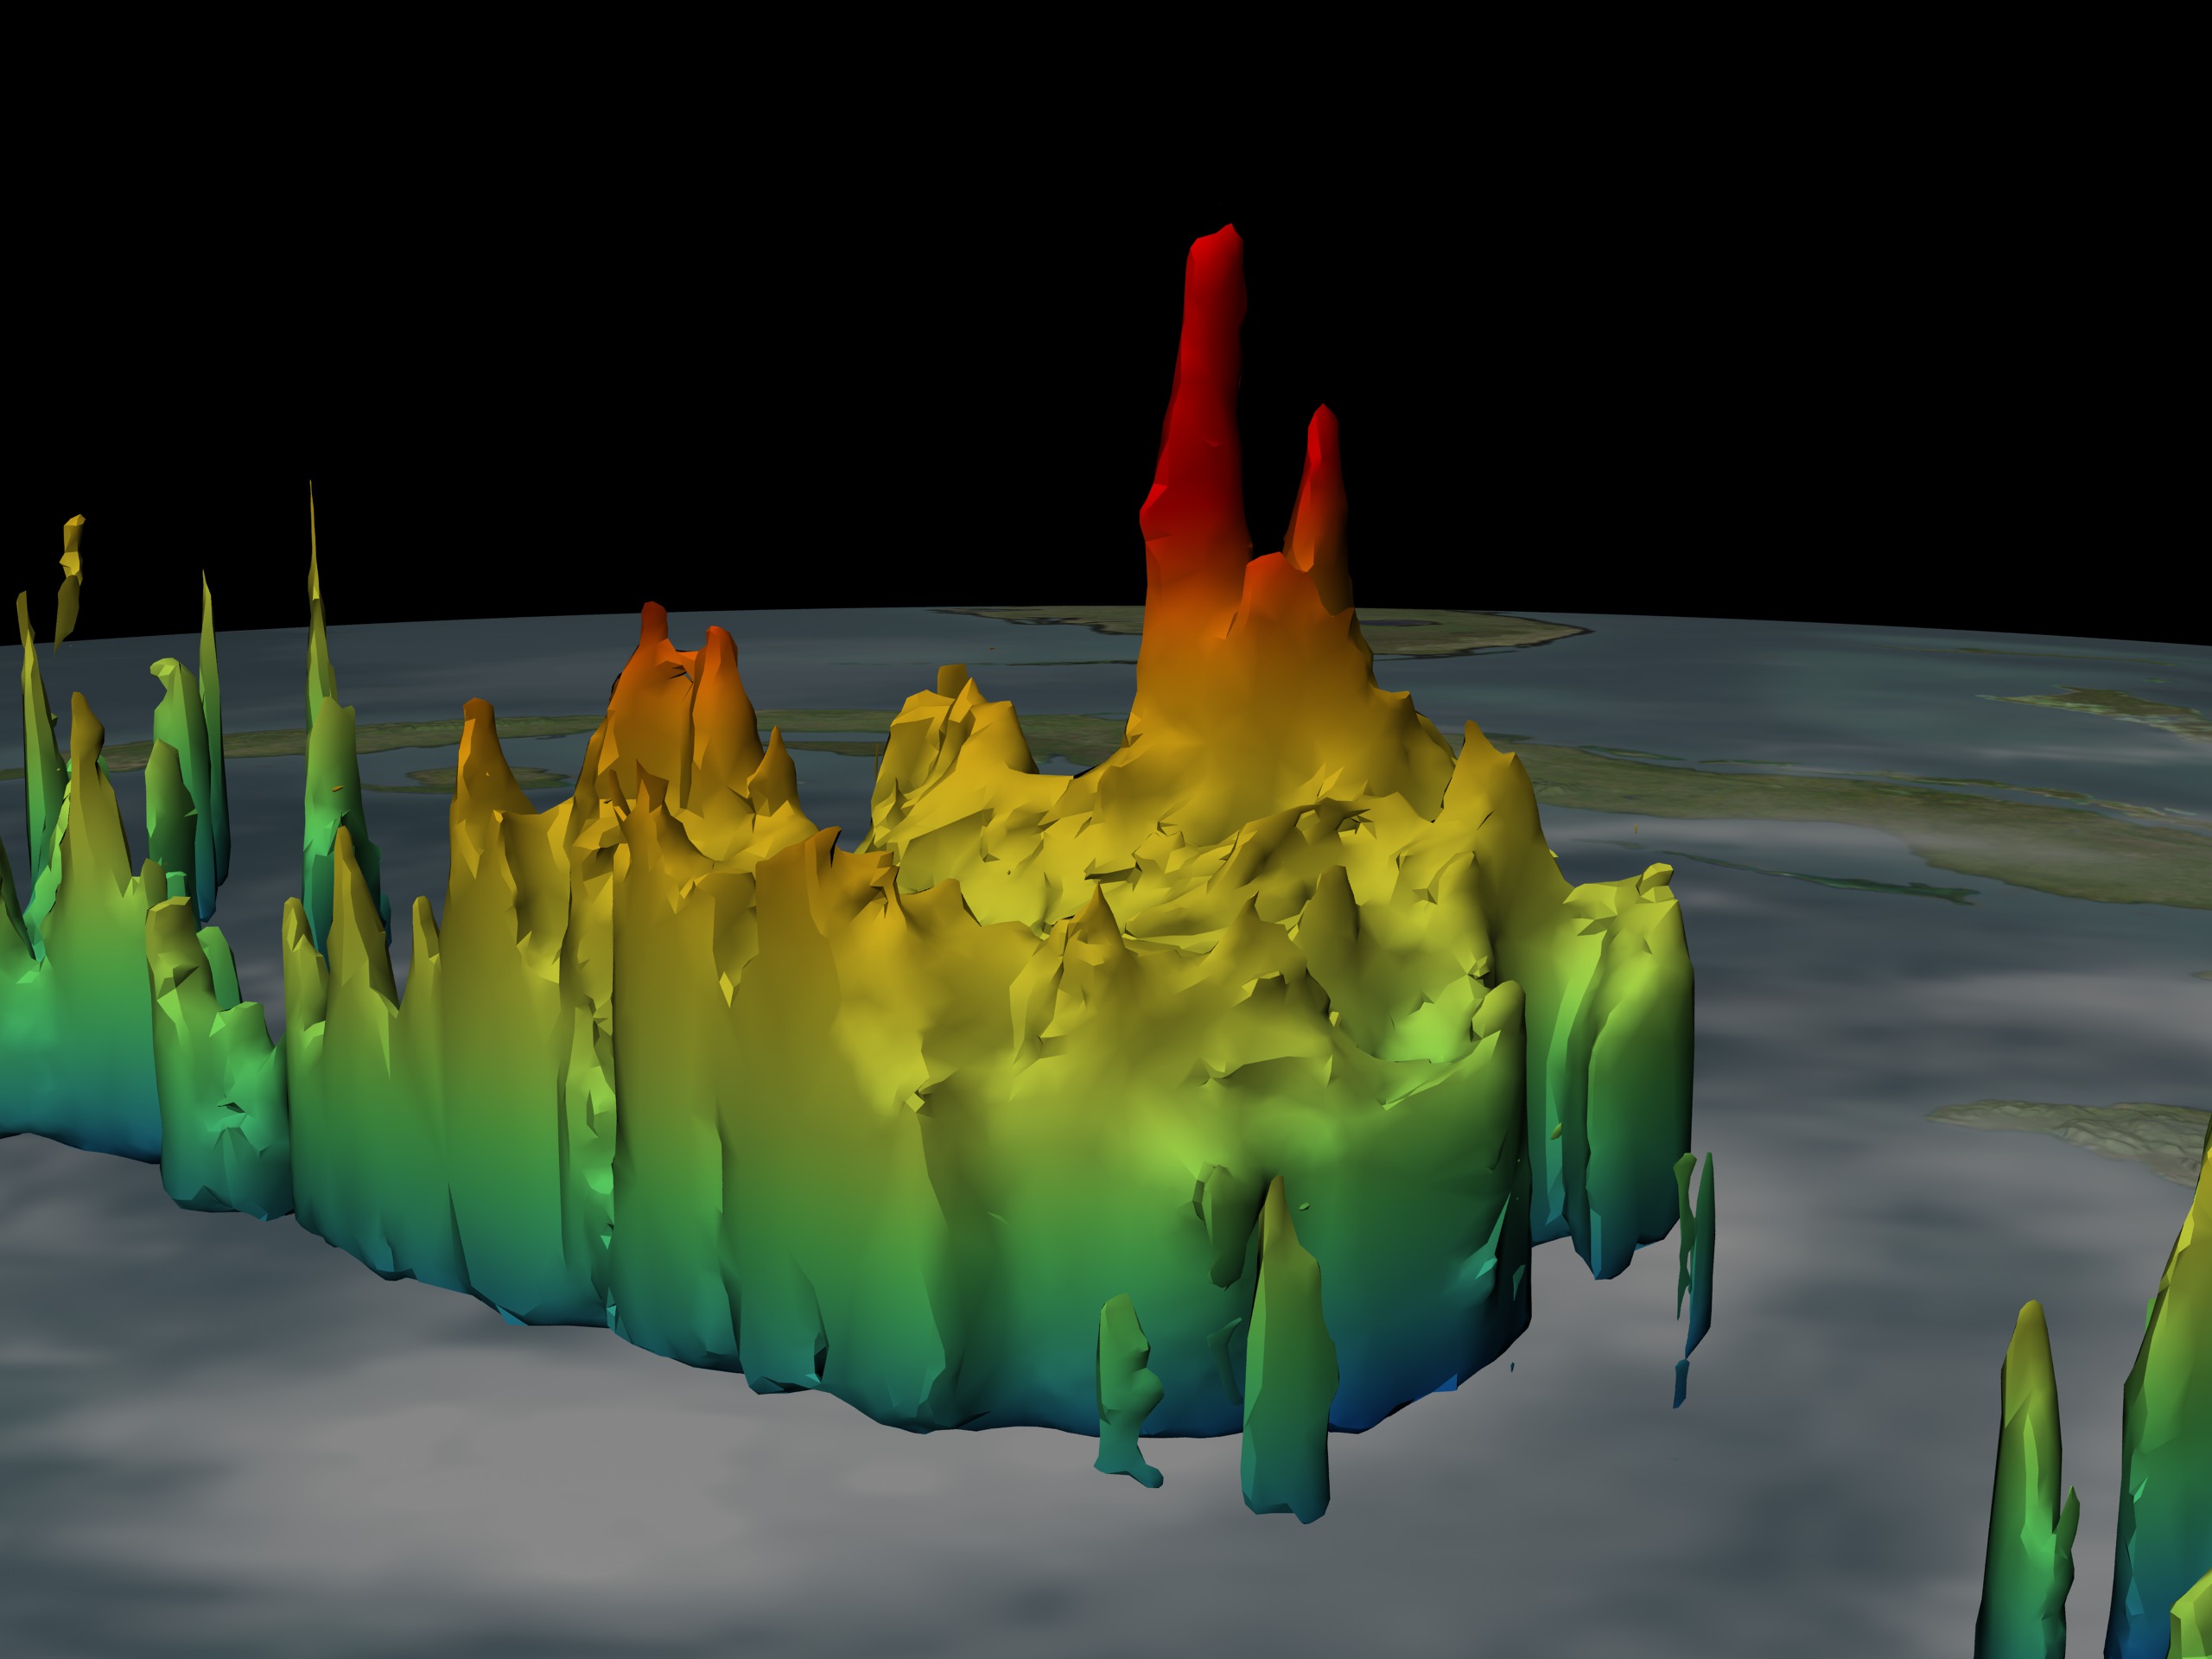 TRMM captured 2 very deep Hot Towers in the eyewall of Tropical Storm Wilma.  These towers measured 15-16 km high.